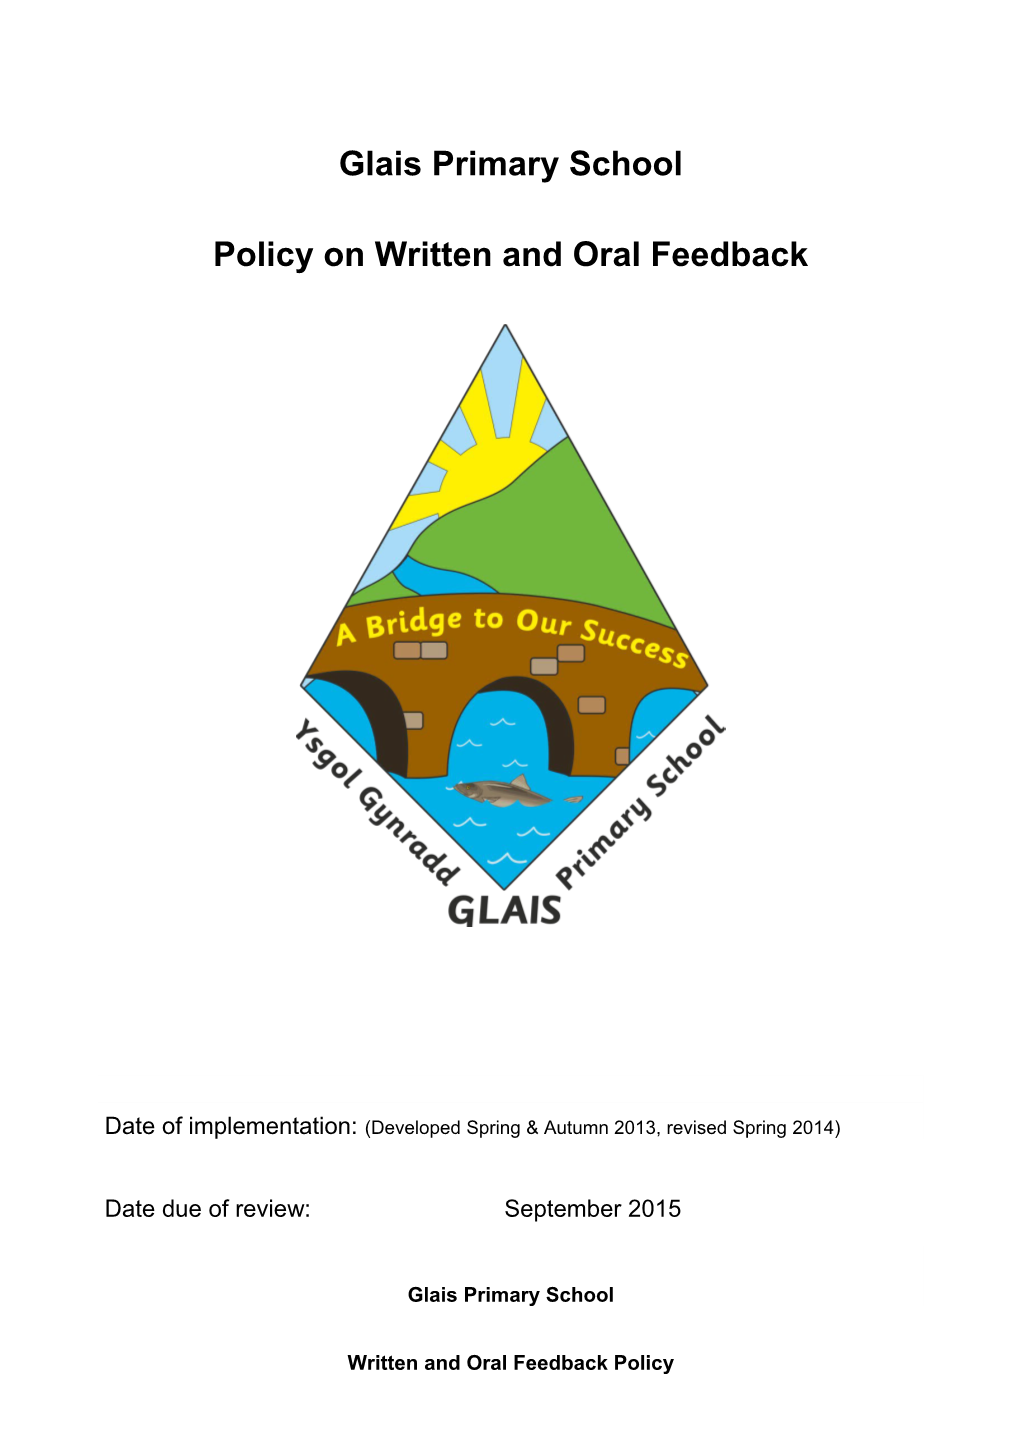 Policy on Written and Oral Feedback